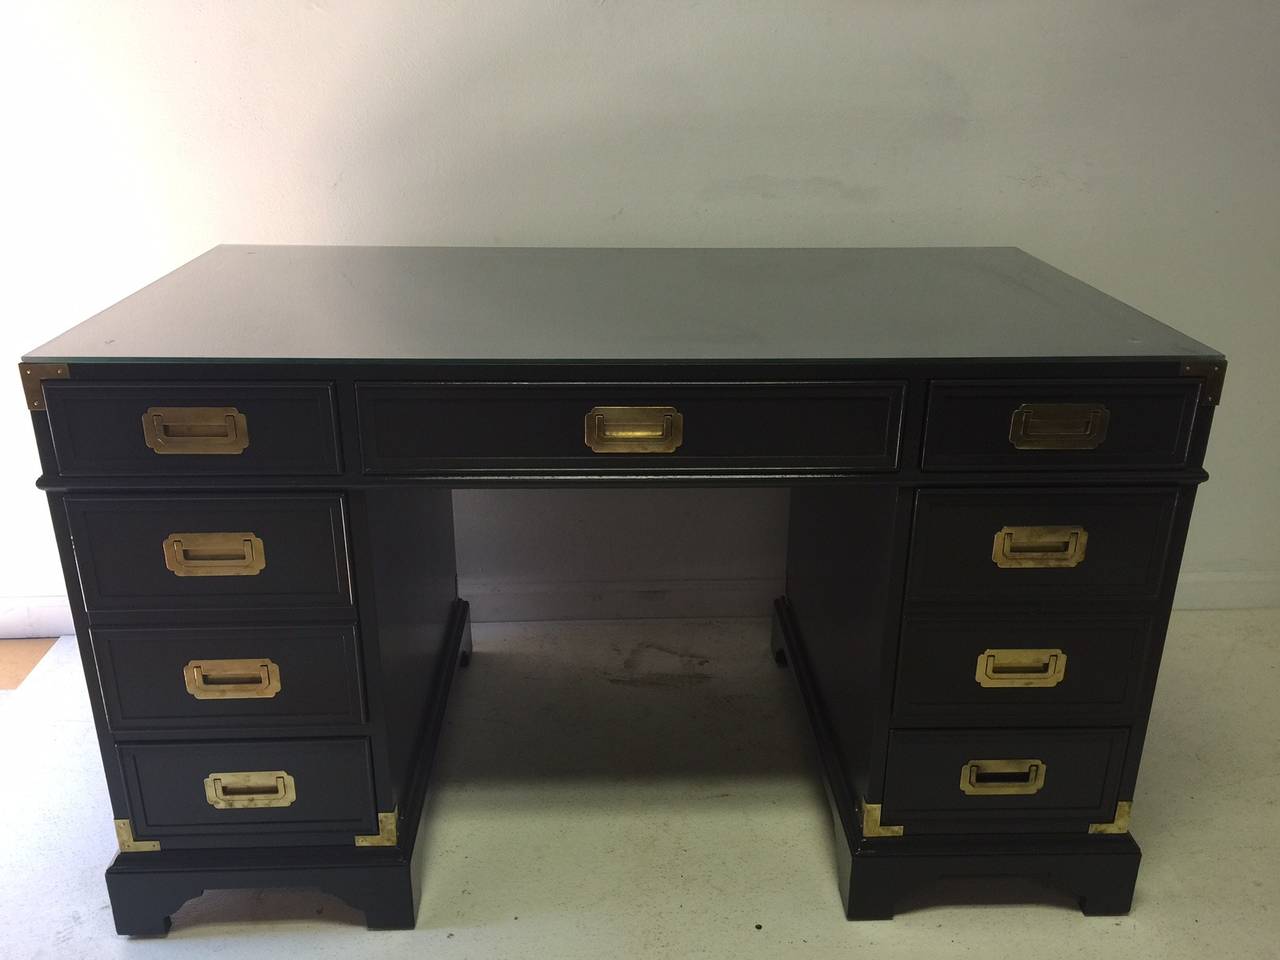 This strong vintage desk is ready for round two in its life and is spiffed up with a new coat of charcoal lacquer and just polished brass hardware. Simple, elegant, timeless, it will grace your home or office. Top it with a brass lamp, an elegant